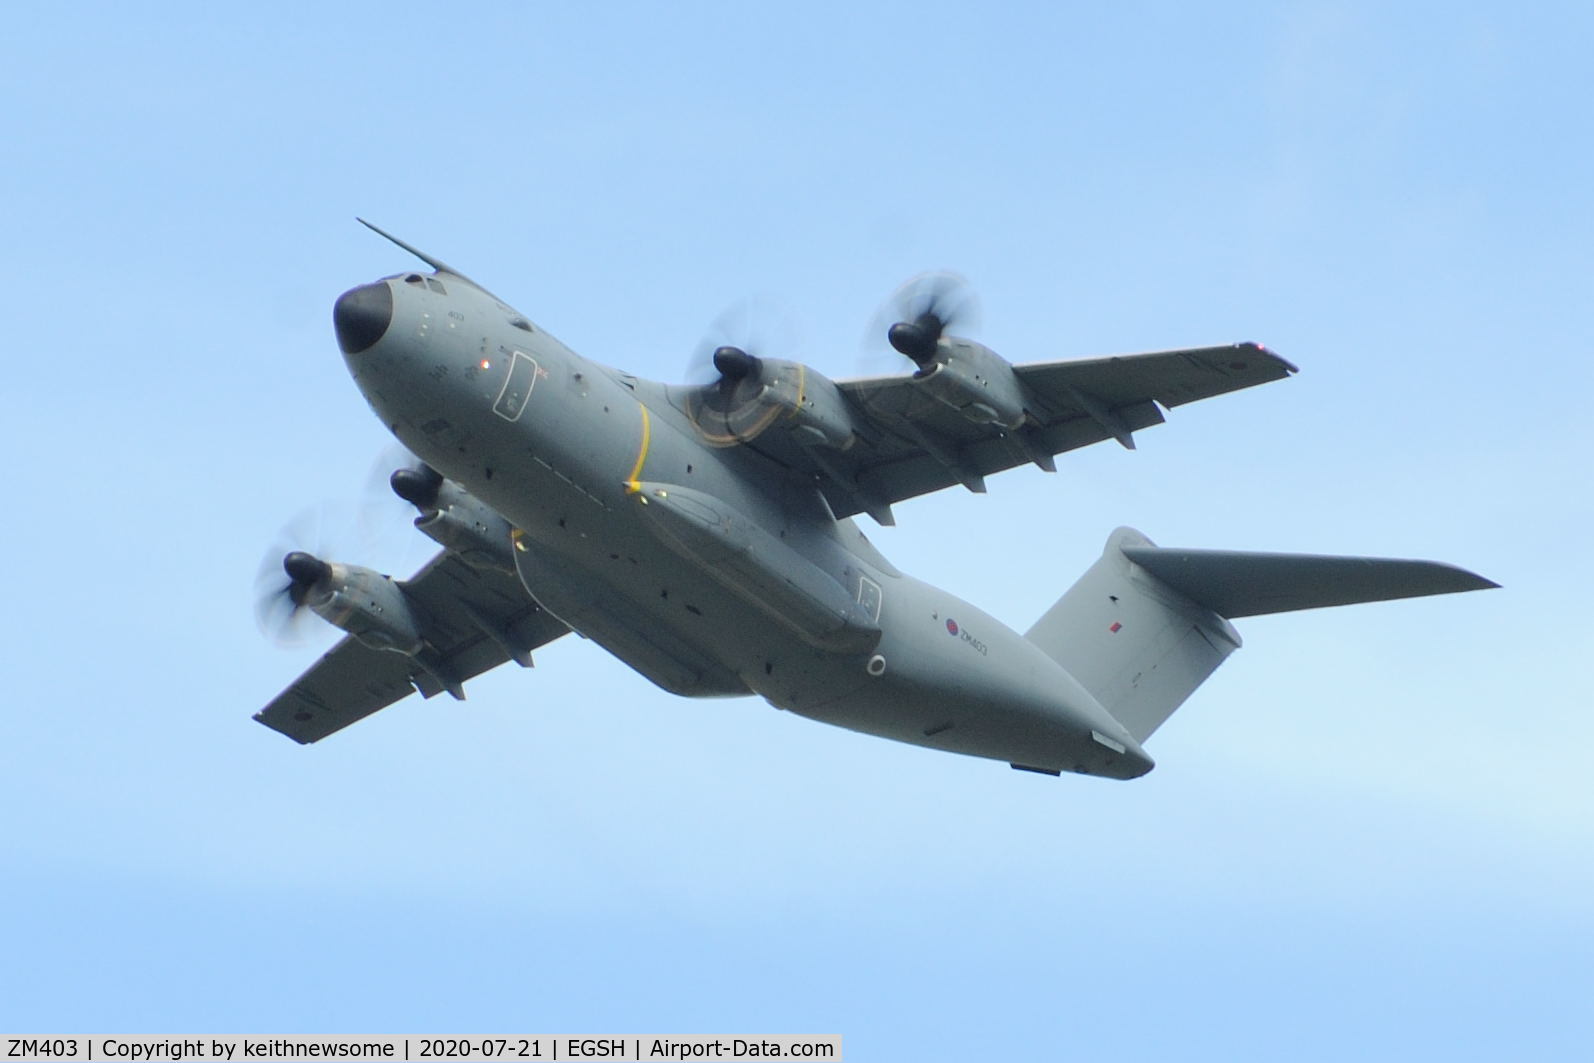 ZM403, 2015 Airbus A400M-180 Atlas C.1 C/N 020, One of several ILS approaches.